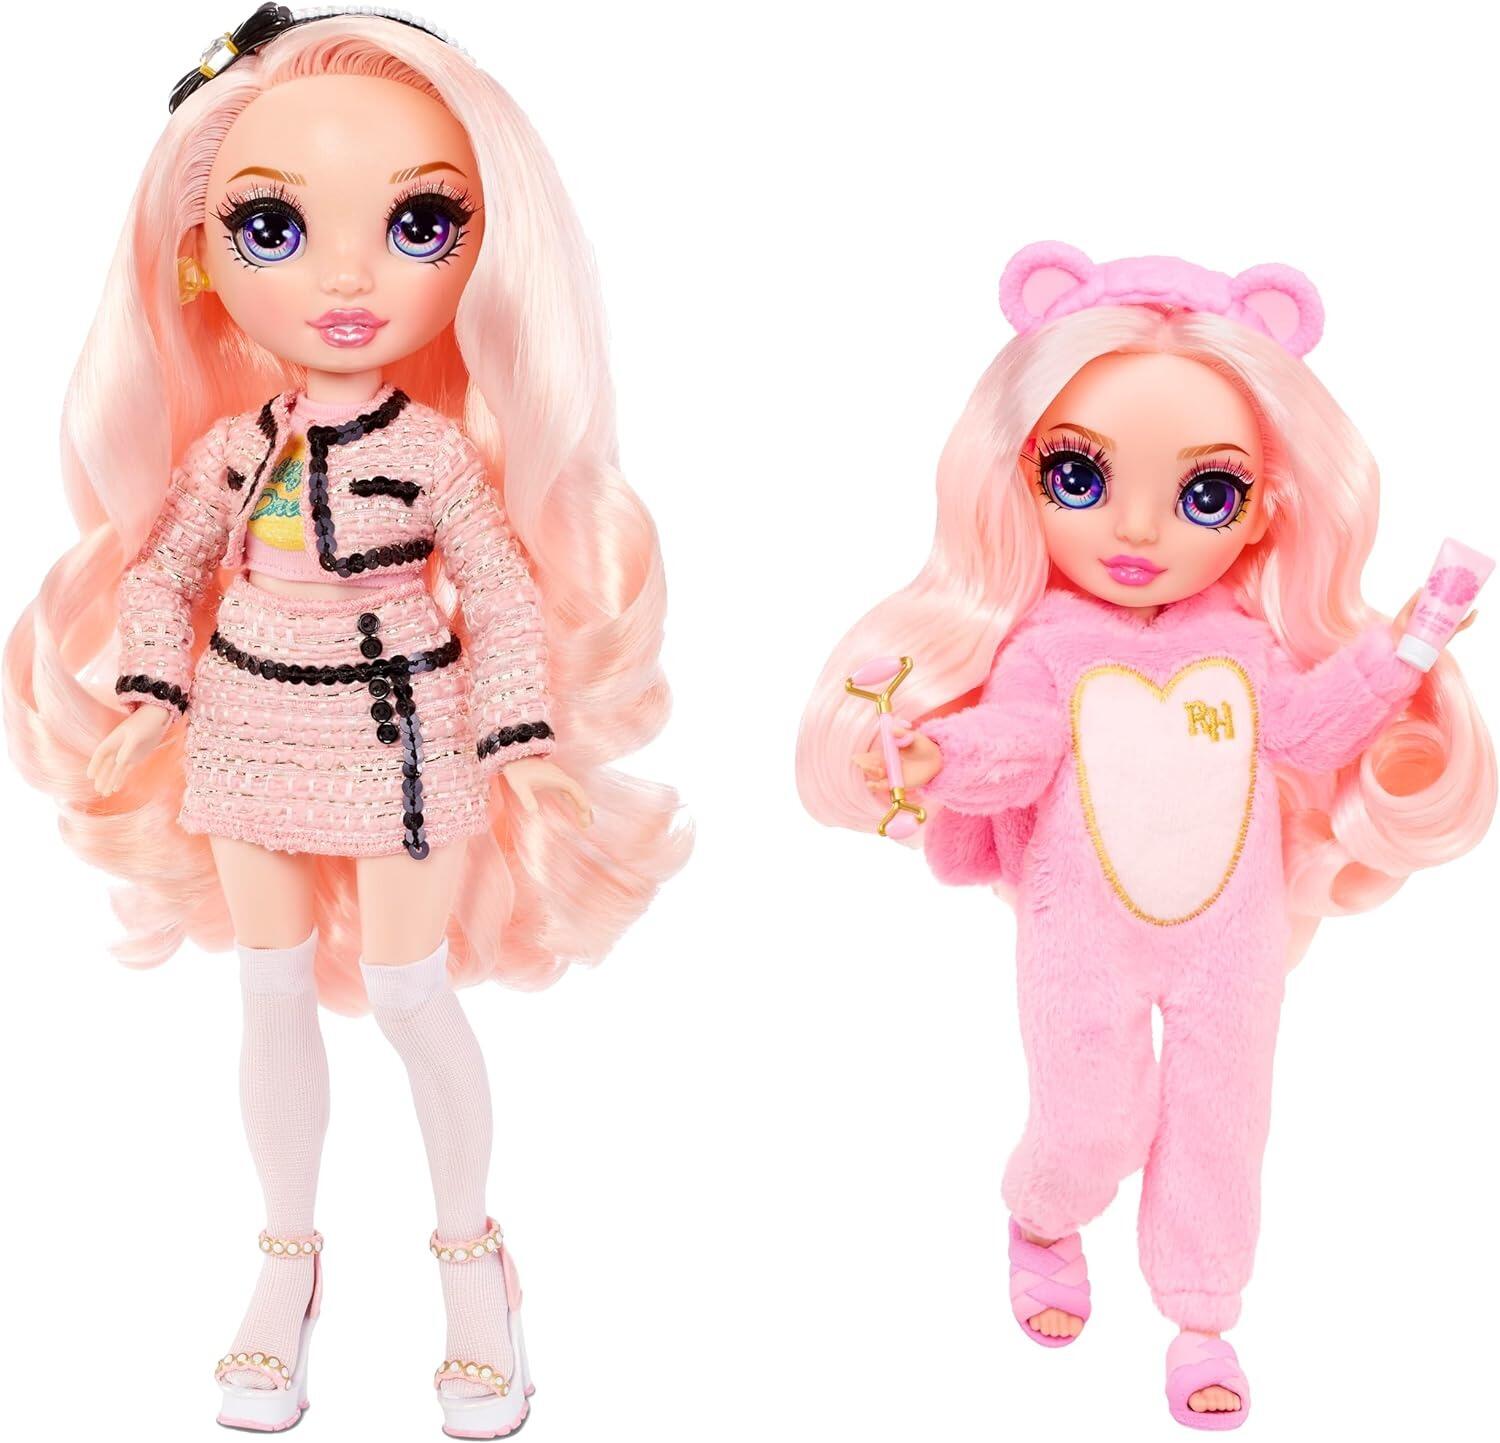 Rainbow High Jr High PJ Party- Bella (Pink) 9” Posable Doll with Soft Onesie, Slippers, Play Accessories